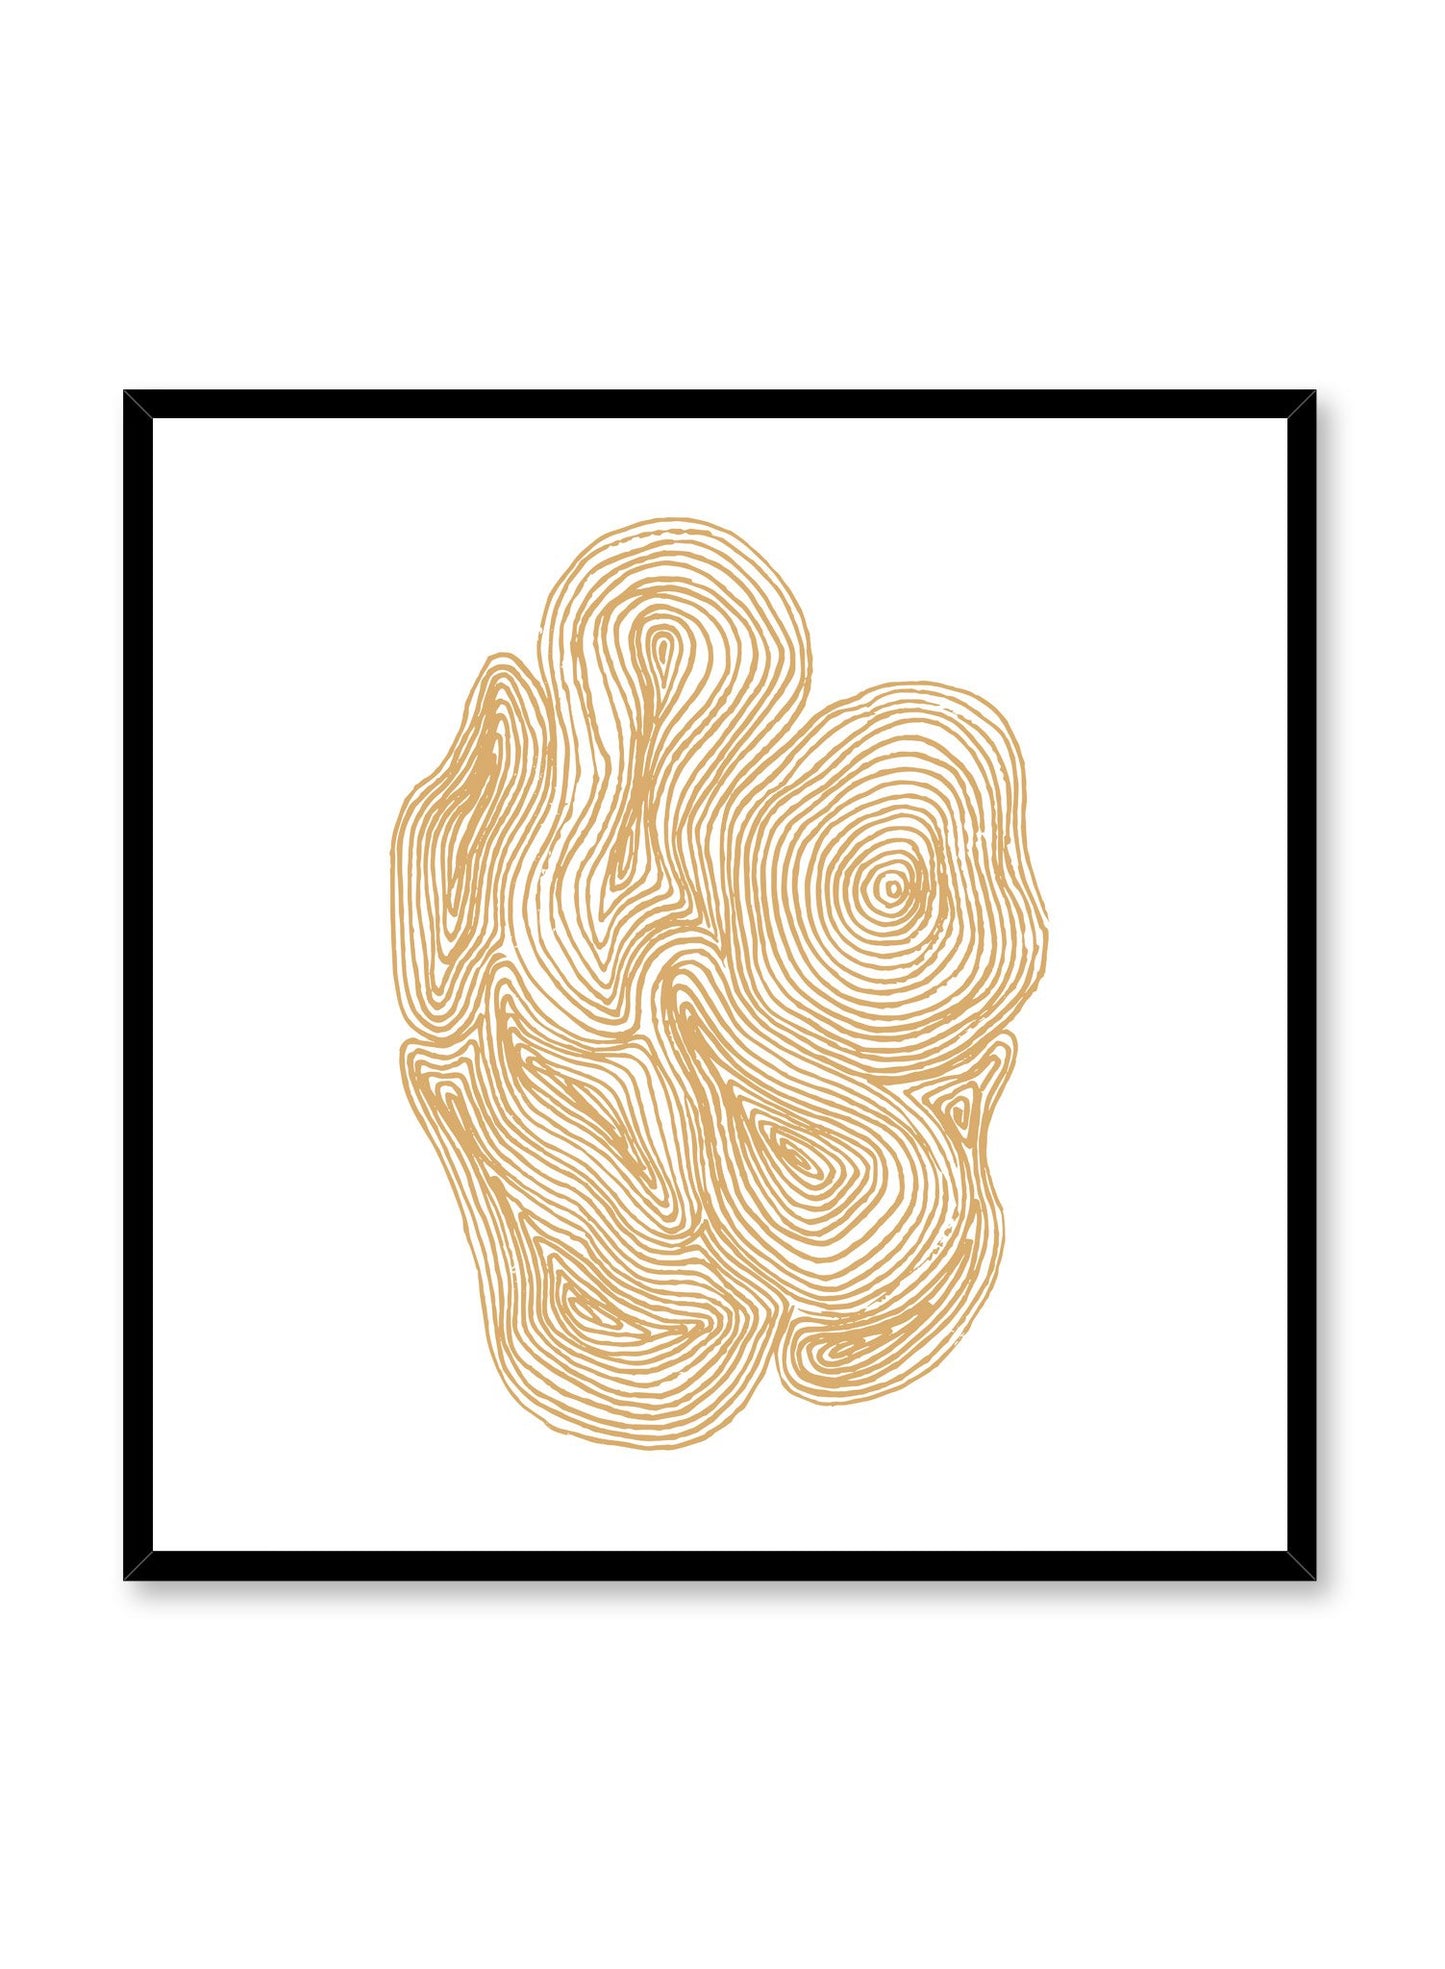 Modern minimalist abstract artwork by Opposite Wall with Cluster of Swirls in Yellow